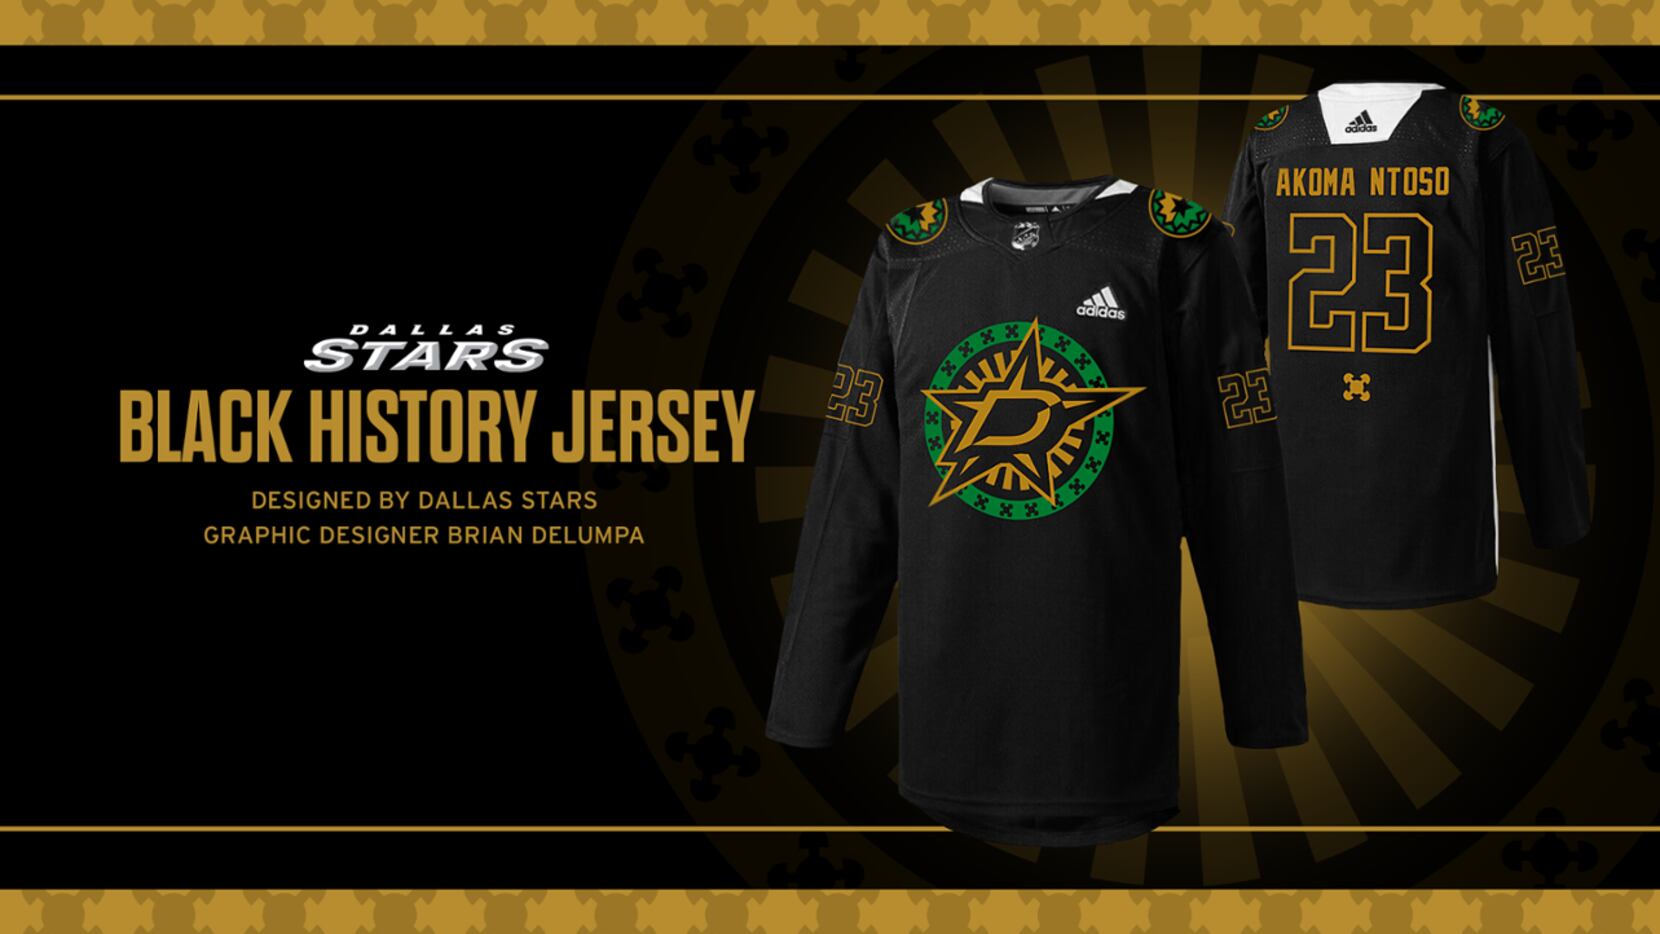 Dallas Stars unveil ceremonial warm-up jersey for first-ever Black History  Night